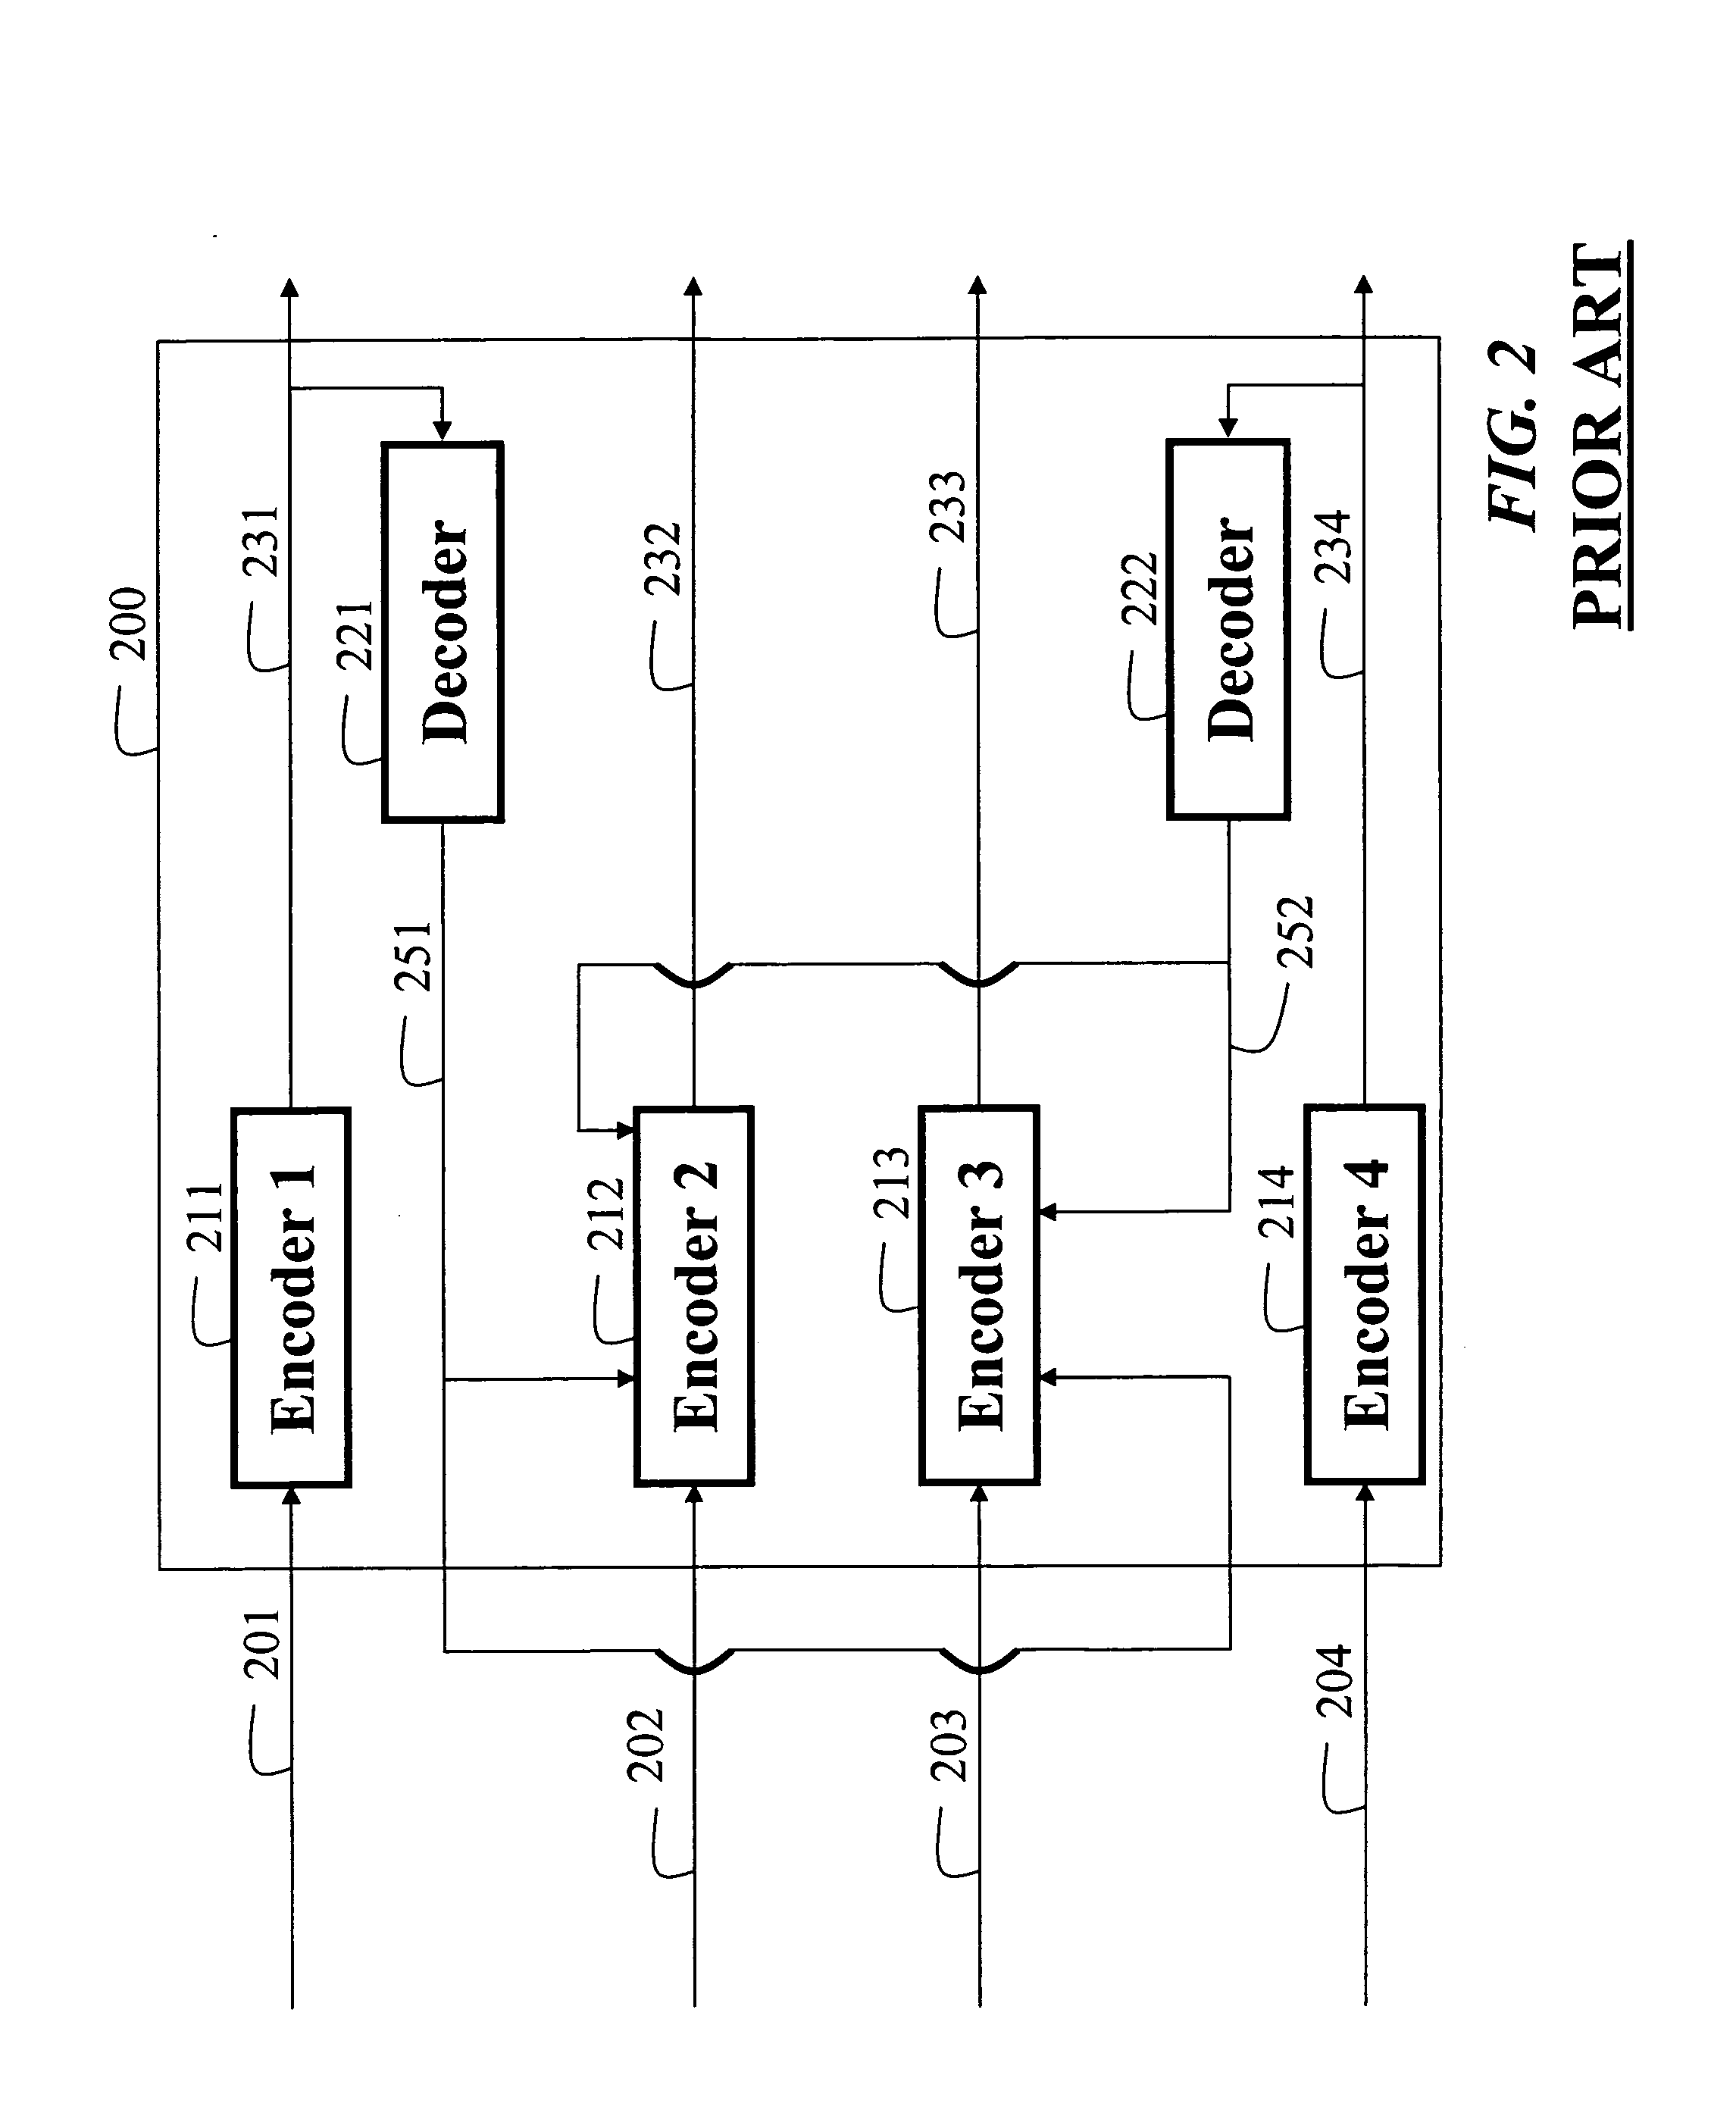 Method and system for processing multiview videos for view synthesis using side information